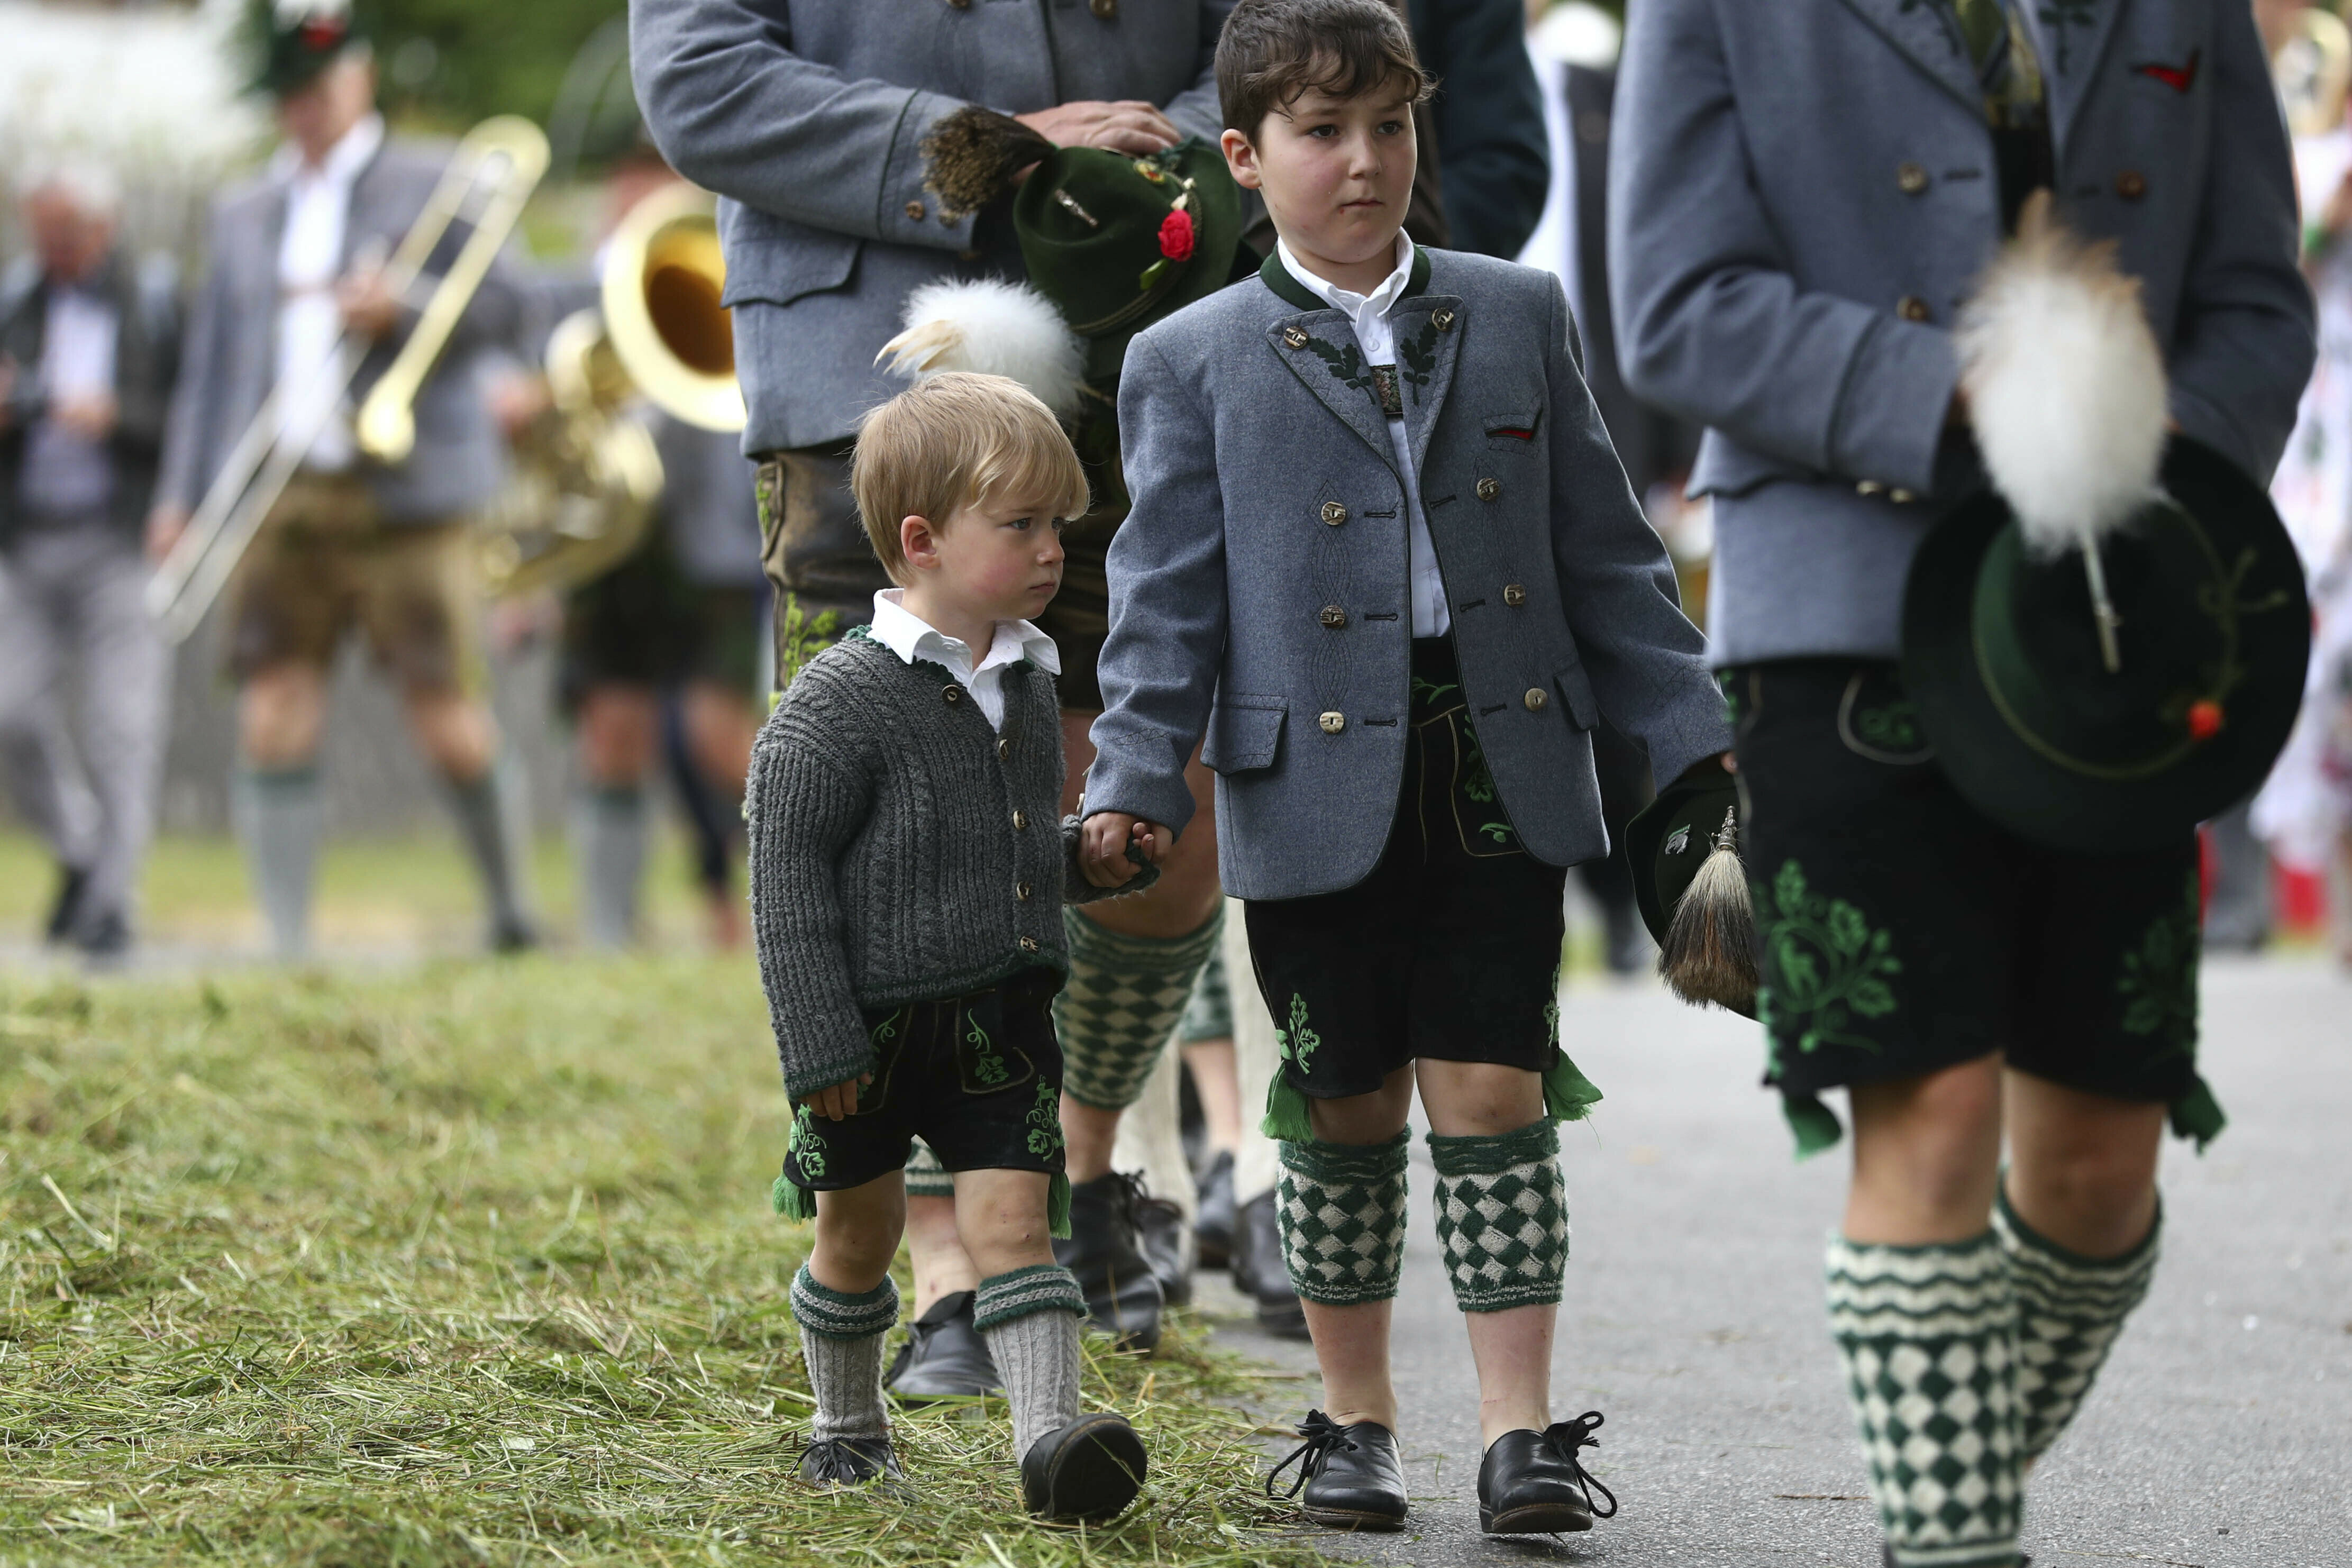 Young boys dressed in traditional clothes wait for the start of a Corpus Christi procession at lake Staffelsee in Seehausen near Murnau, Germany, Thursday, June 20, 2019. (AP Photo/Matthias Schrader)